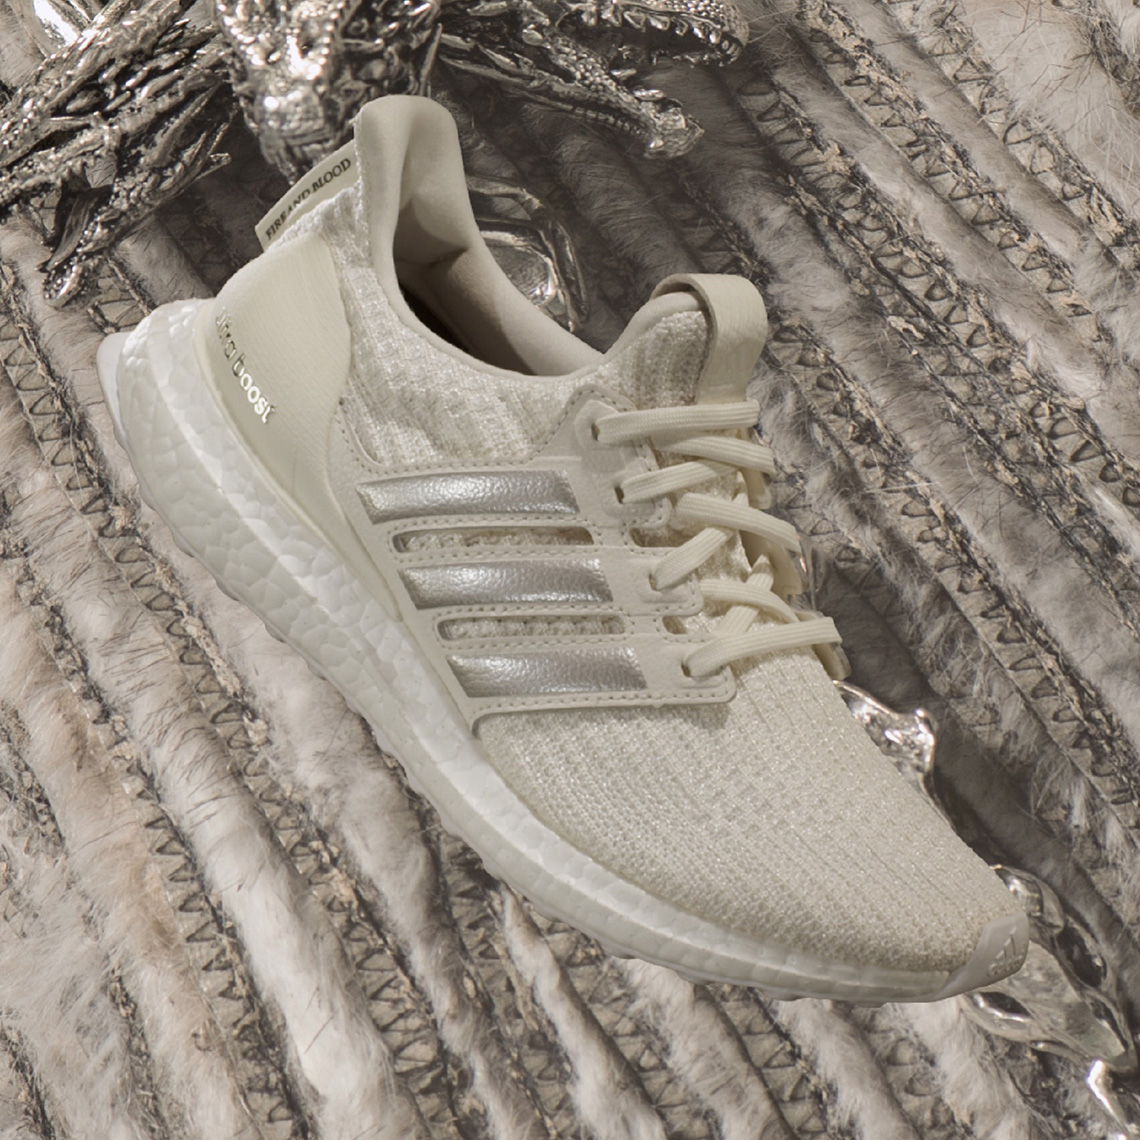 game of thrones adidas protect shoes release date 3